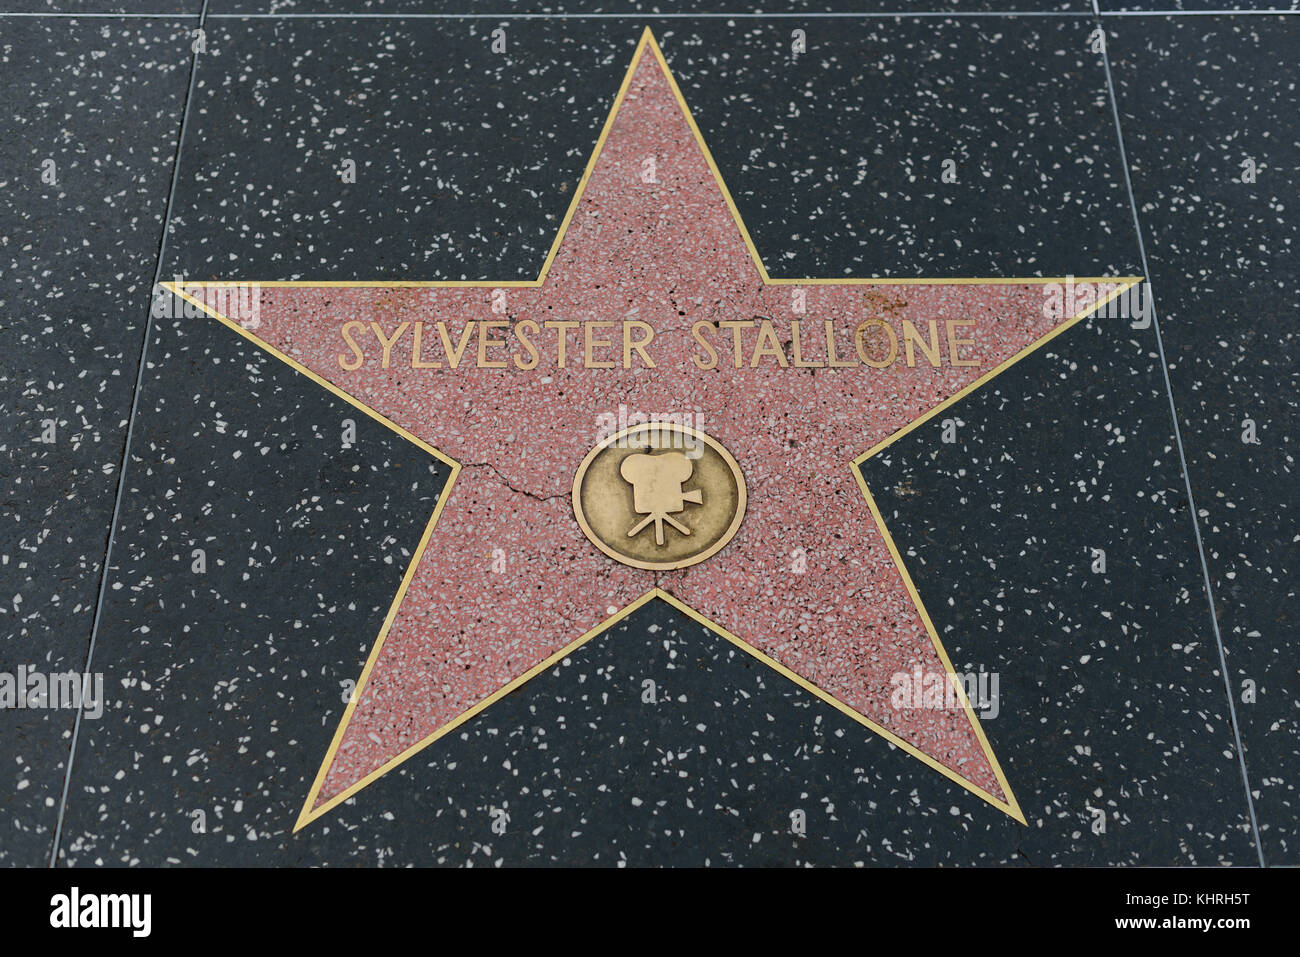 HOLLYWOOD, CA - DECEMBER 06: Silvester Stallone star on the Hollywood Walk of Fame in Hollywood, California on Dec. 6, 2016. Stock Photo